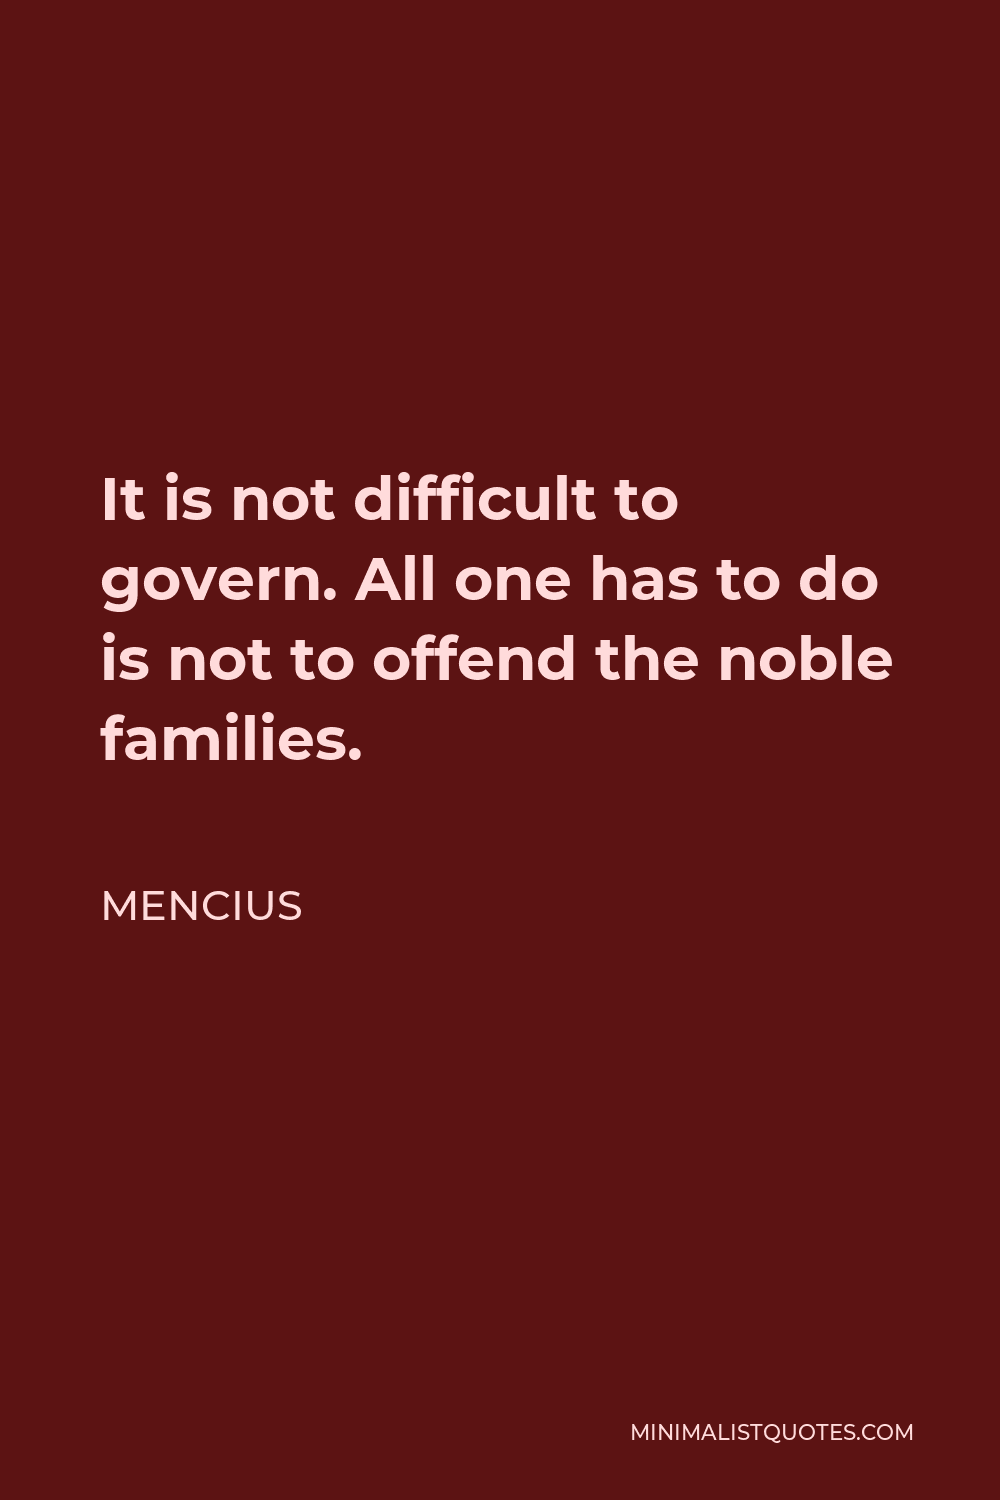 Mencius Quote - It is not difficult to govern. All one has to do is not to offend the noble families.